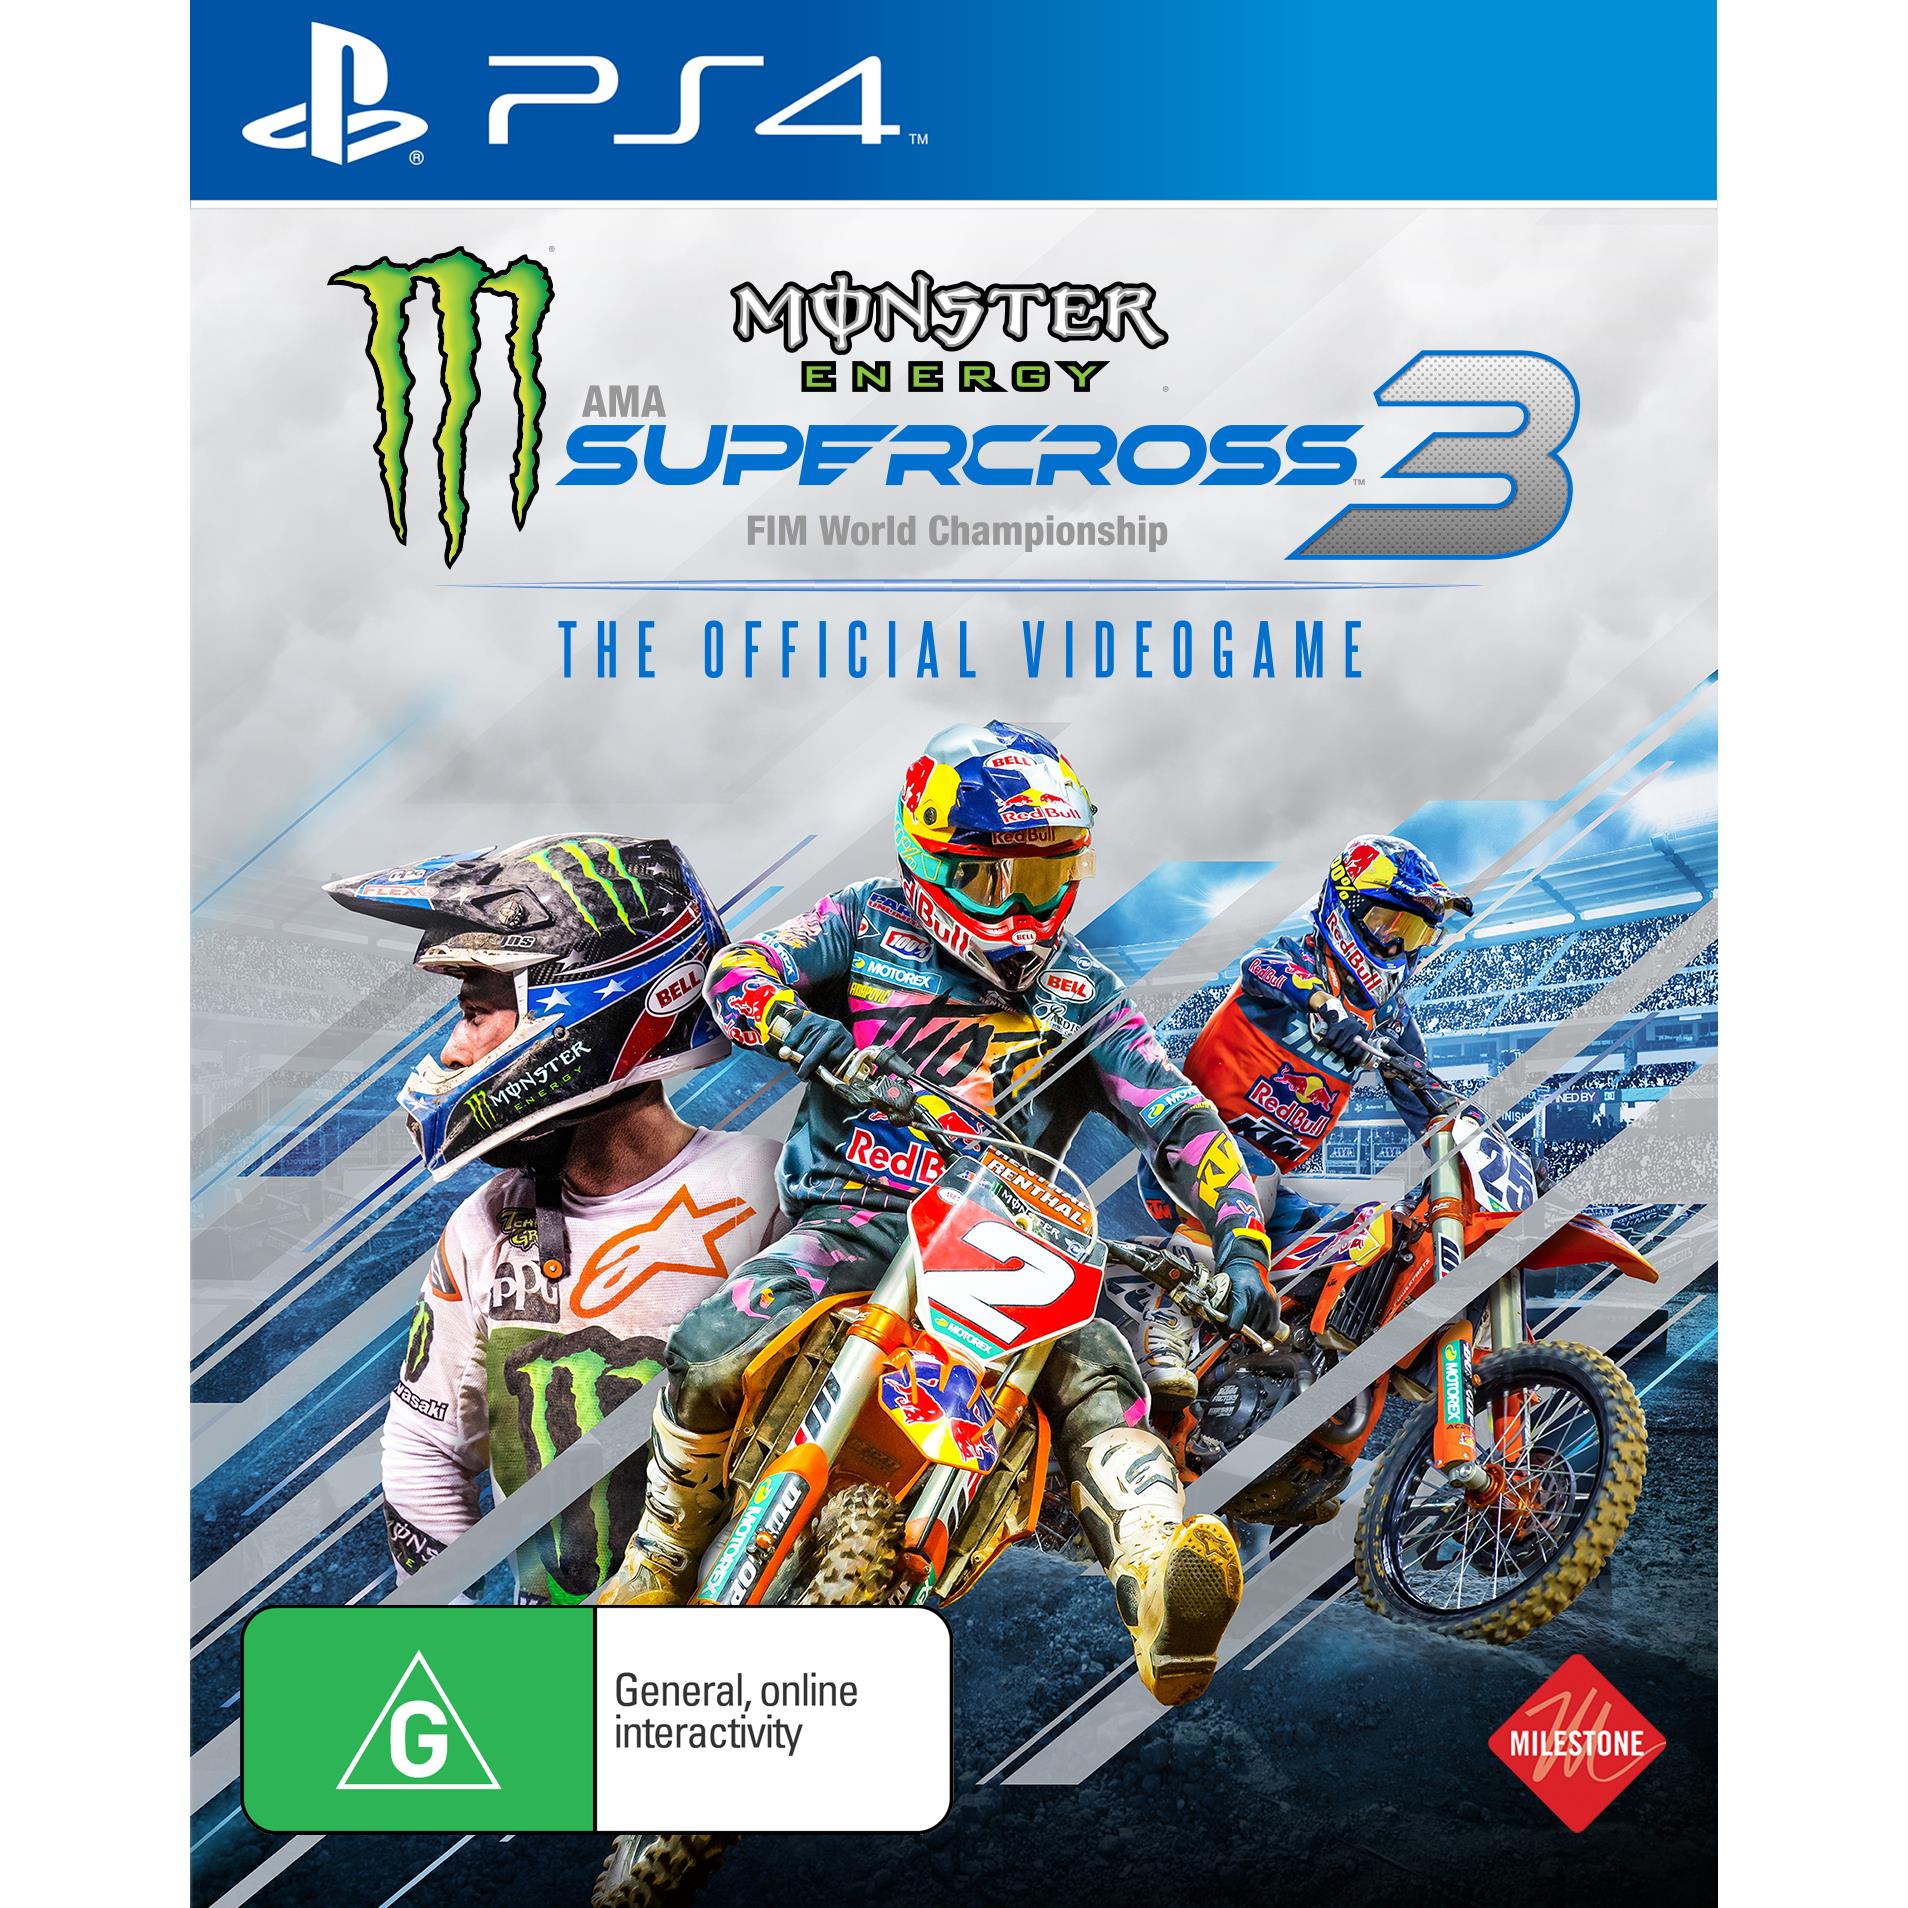 monster energy supercross - the official videogame 3